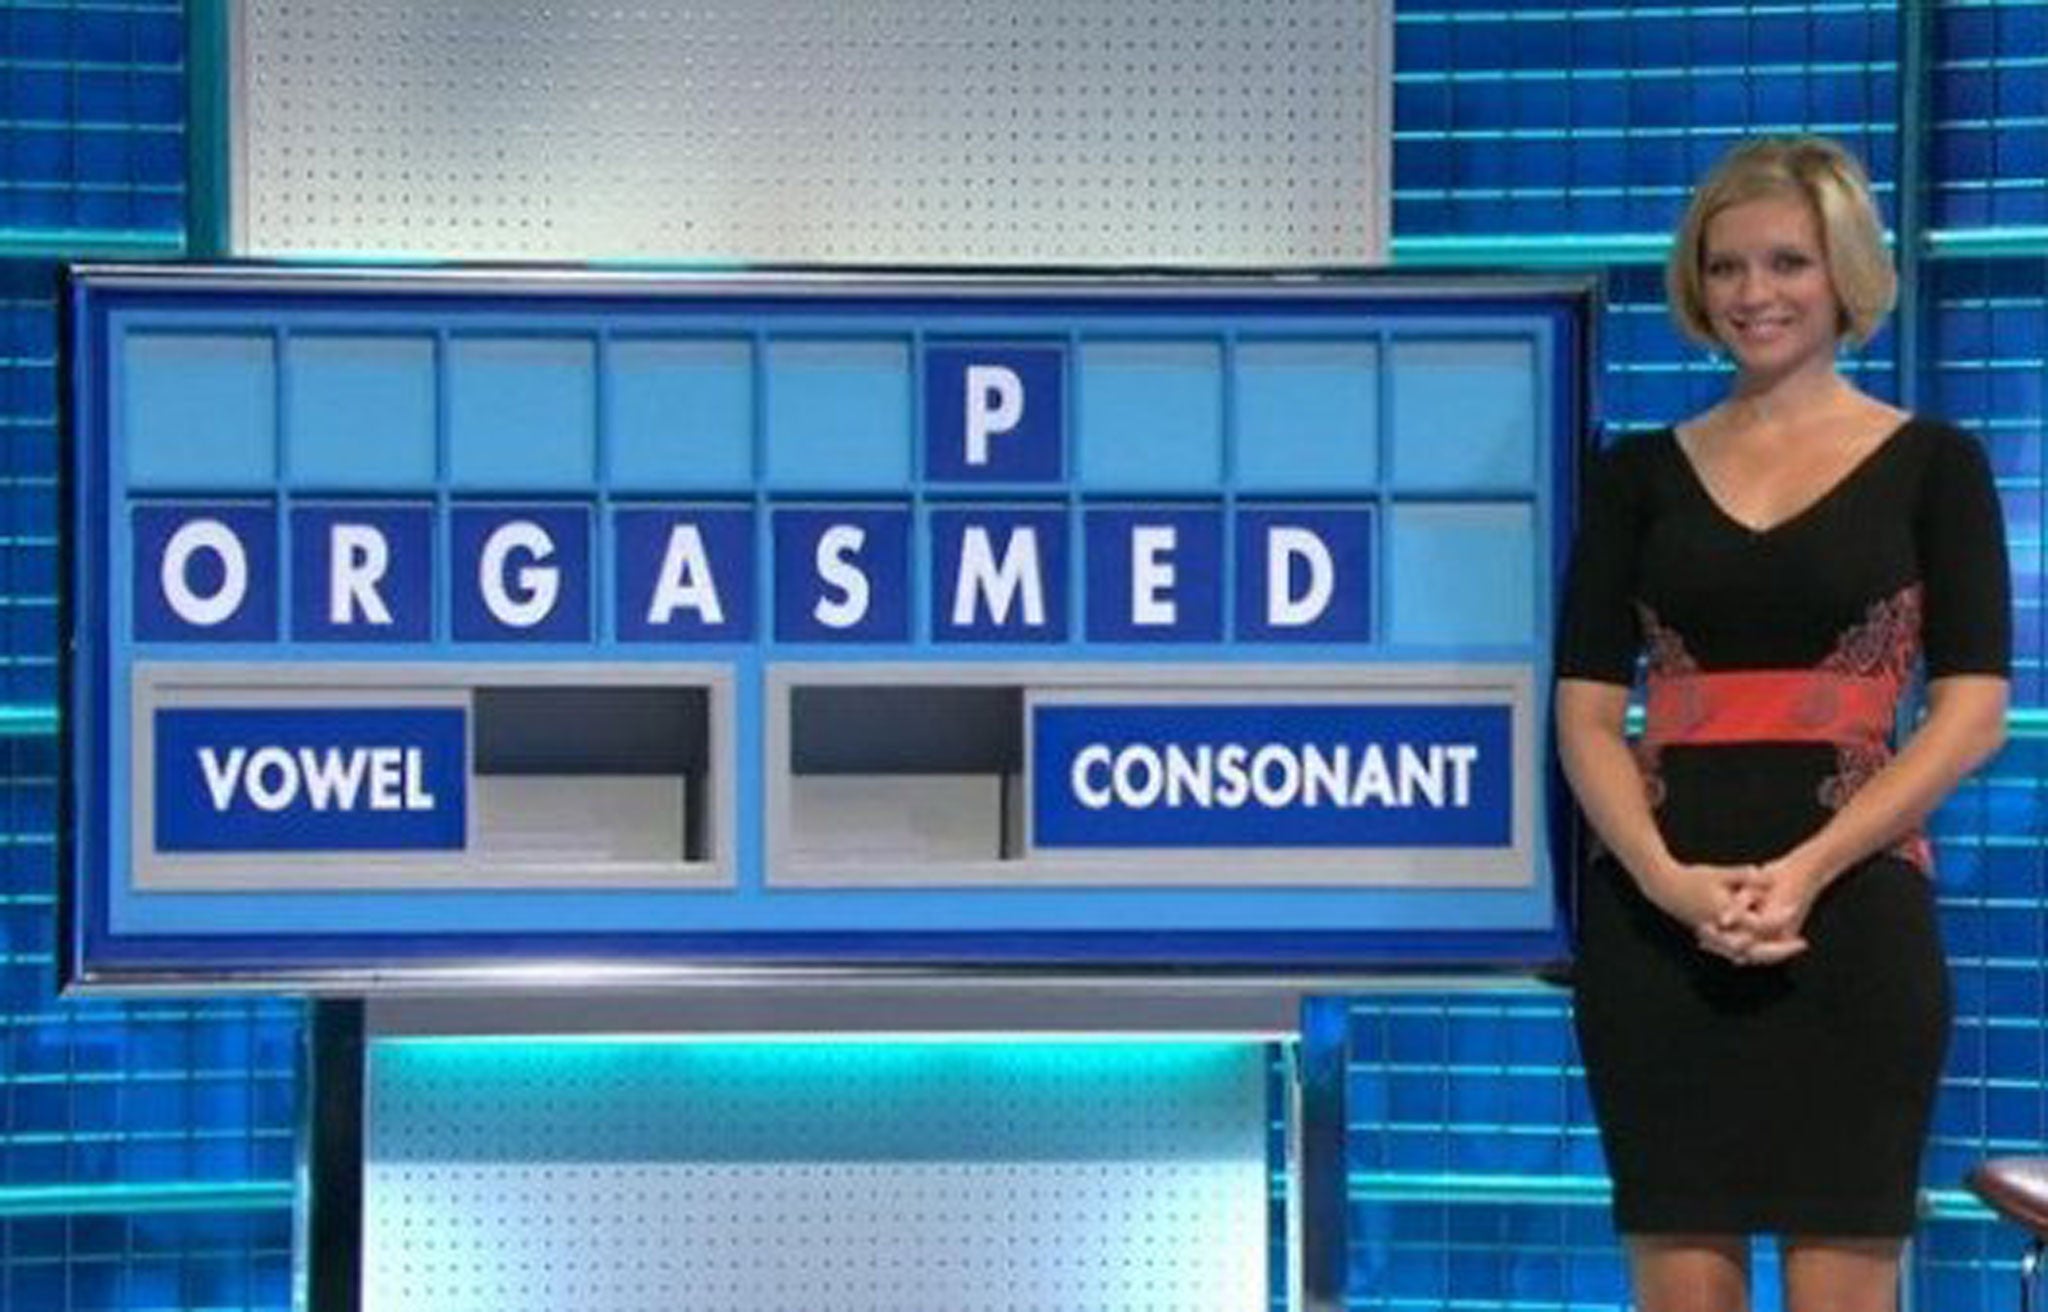 Rachel Riley smiles as the word "orgasmed" is spelled out